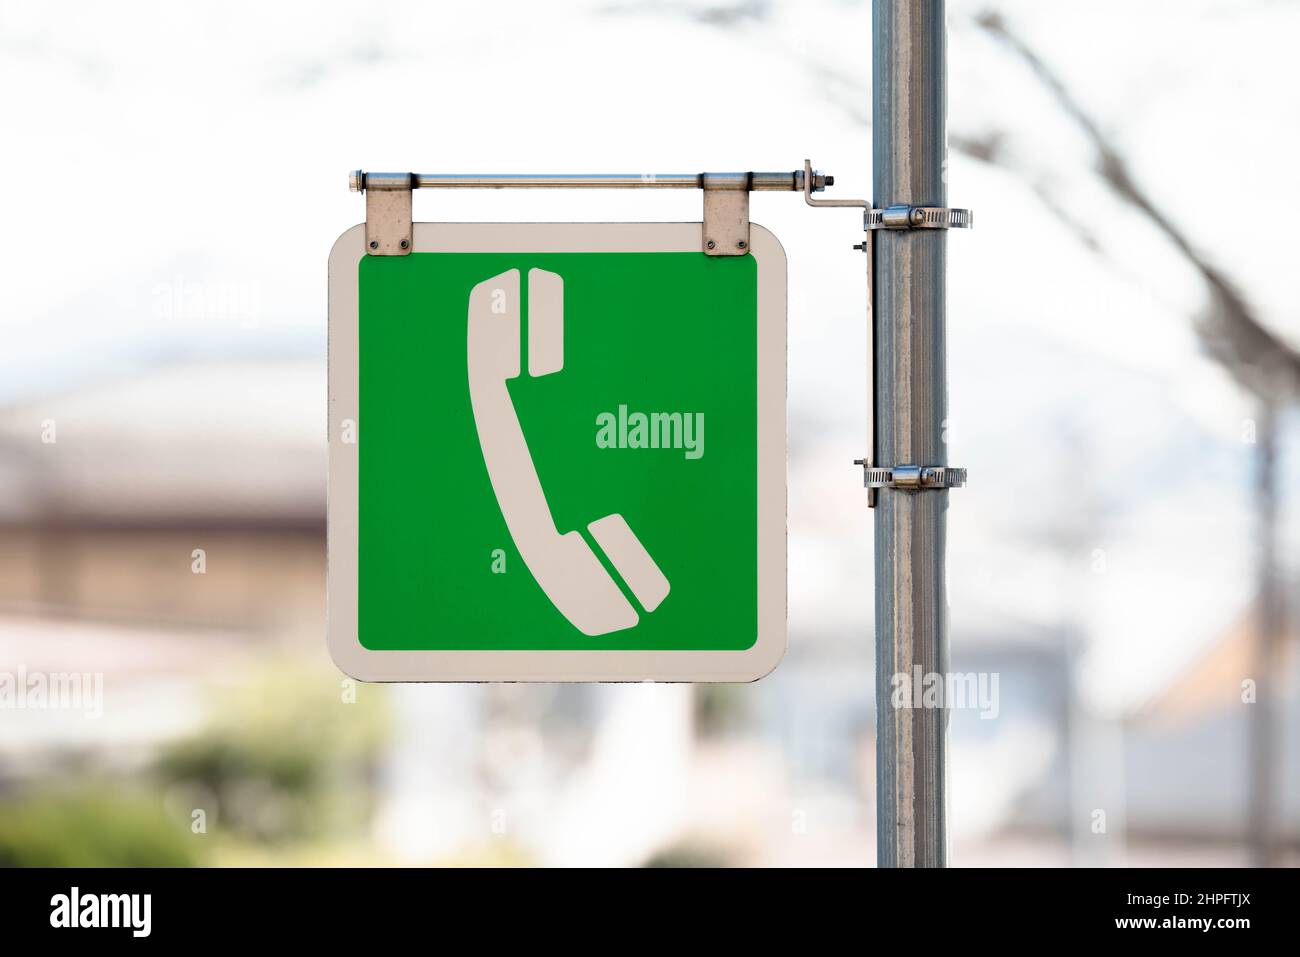 Hanging telephone public pay phone sign on a pole. Color green Stock Photo